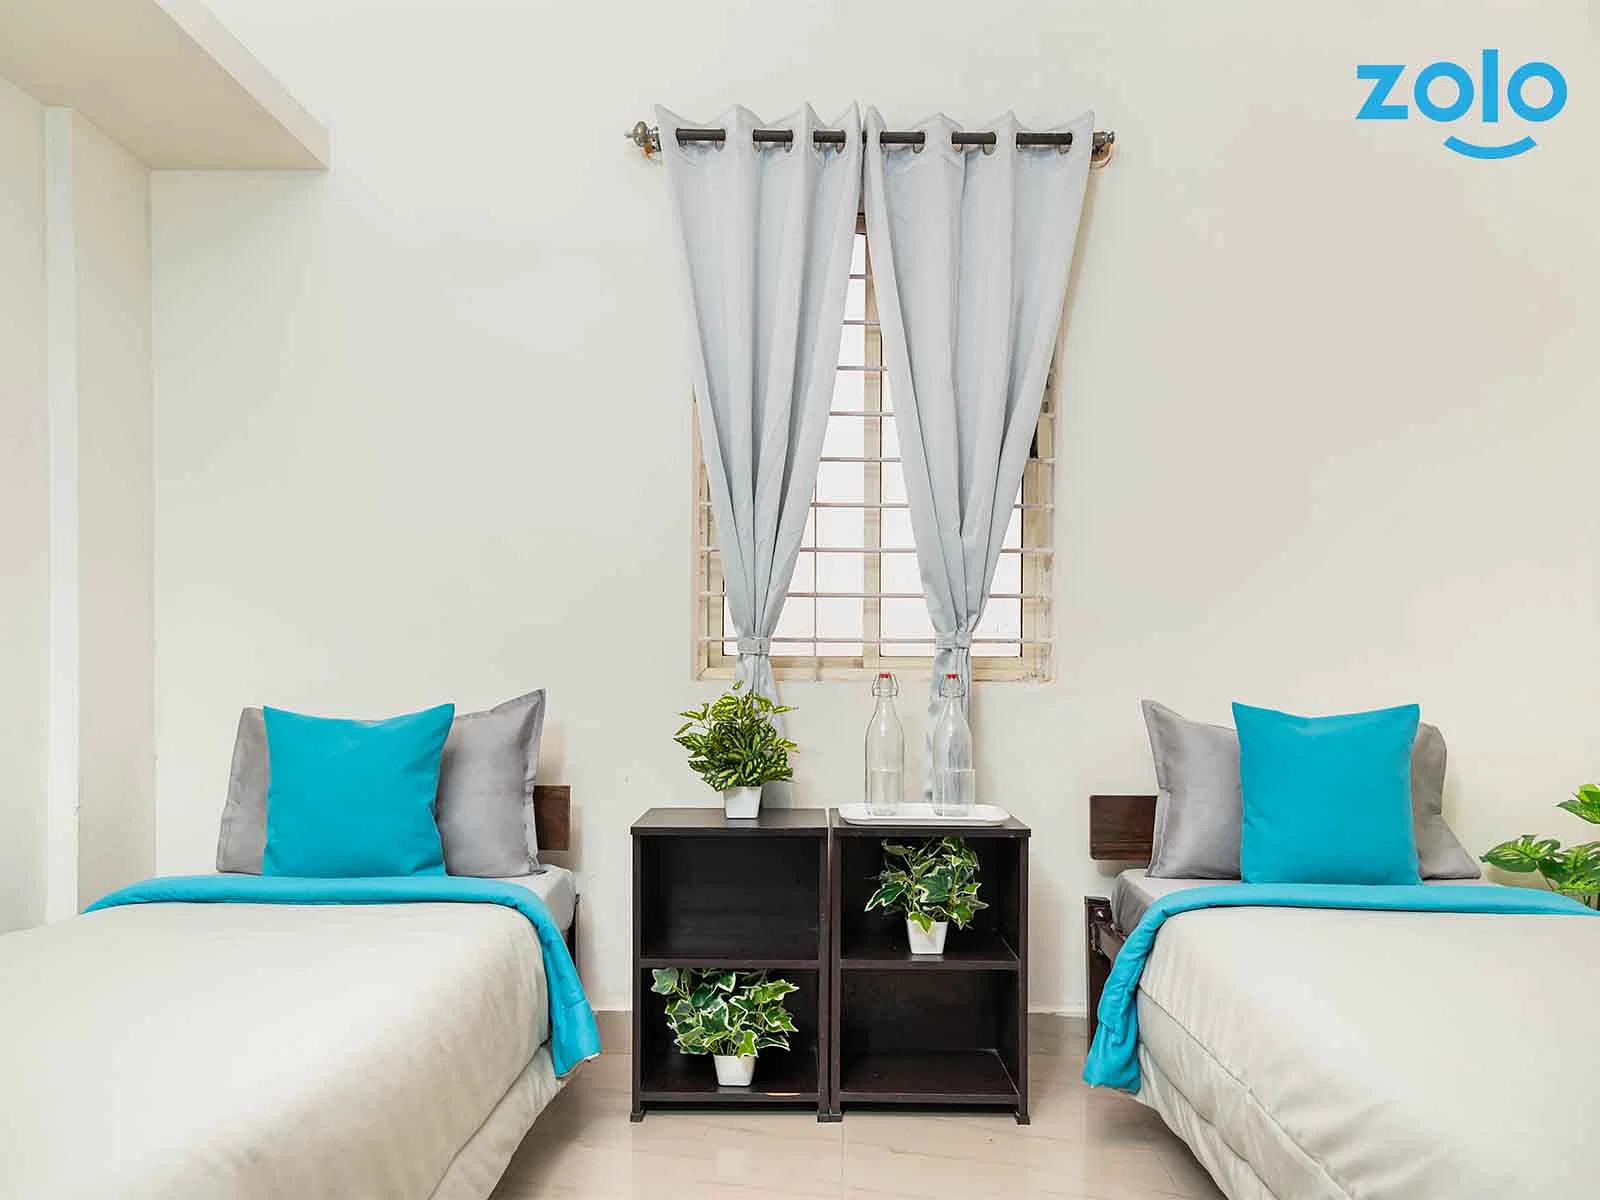 Fully furnished single/sharing rooms for rent in Electronic City Phase 2 with no brokerage-apply fast-Zolo Atlantis